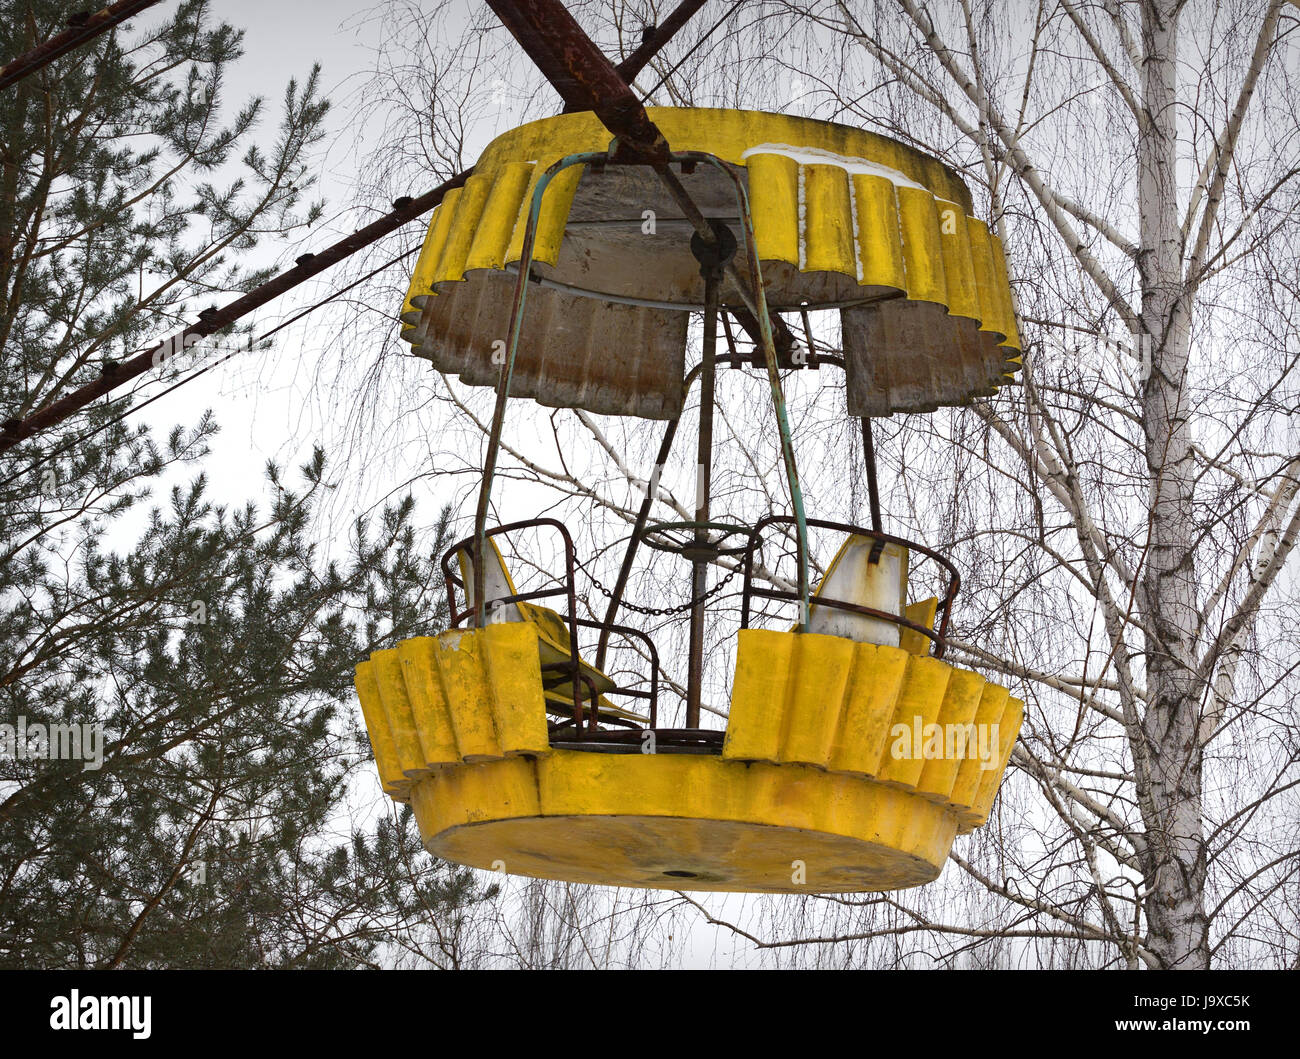 General view of Pripyat, the abandoned city near Chernobyl on March 15, 2013 in Pripyat, Ukraine. A nuclear disaster happened here after reactor nr 4 Stock Photo